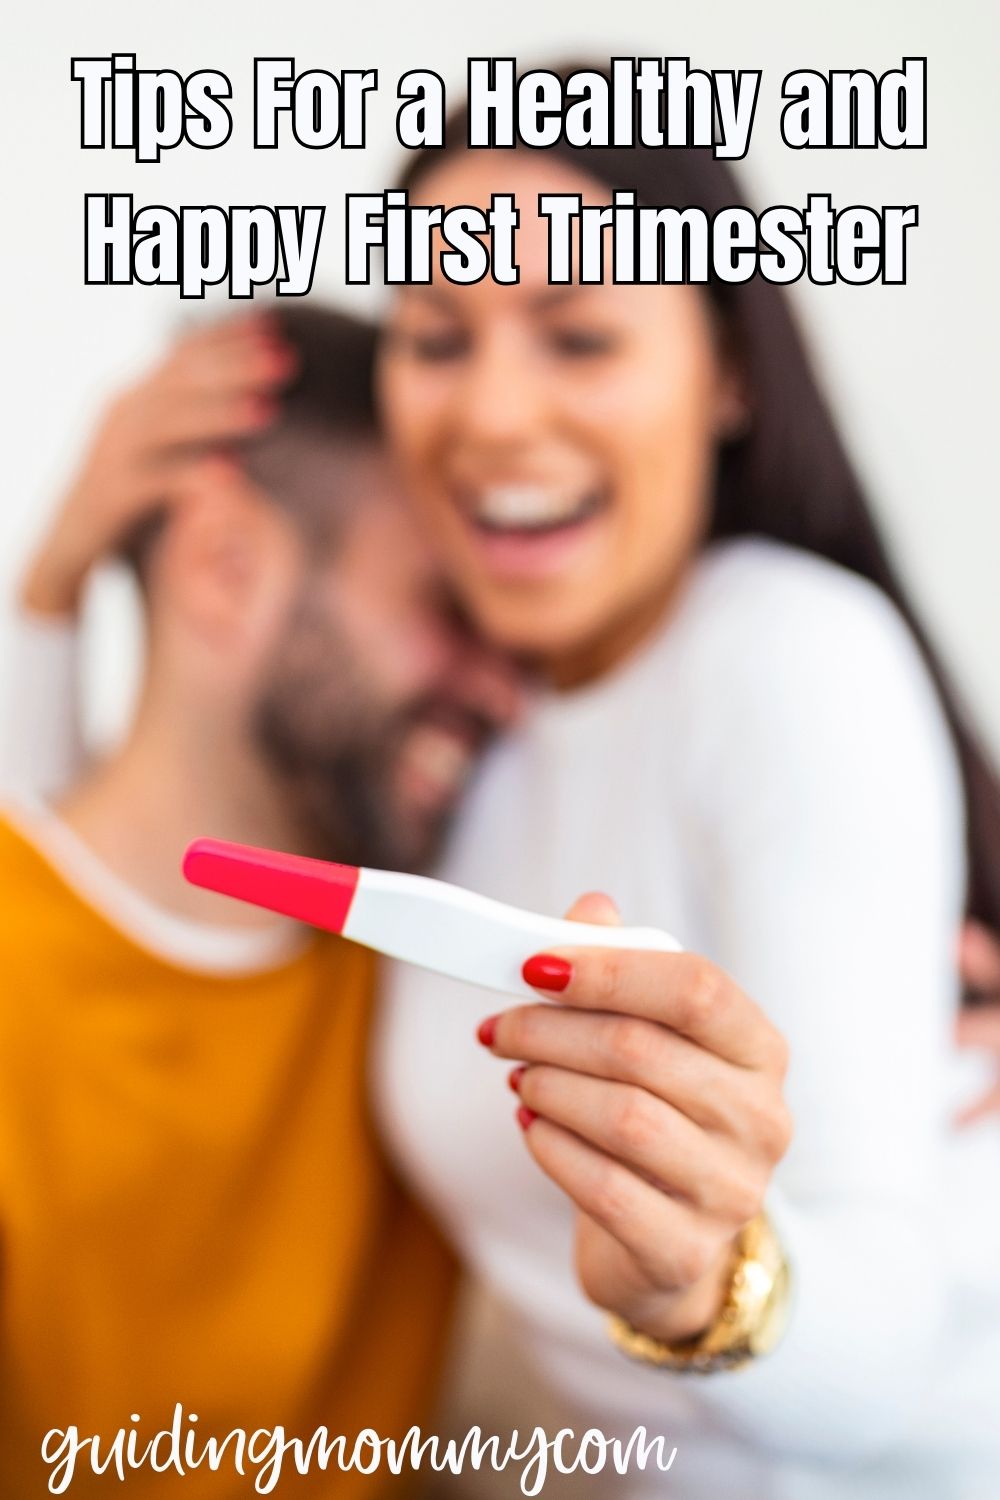 Tips For a Healthy and Happy First Trimester 